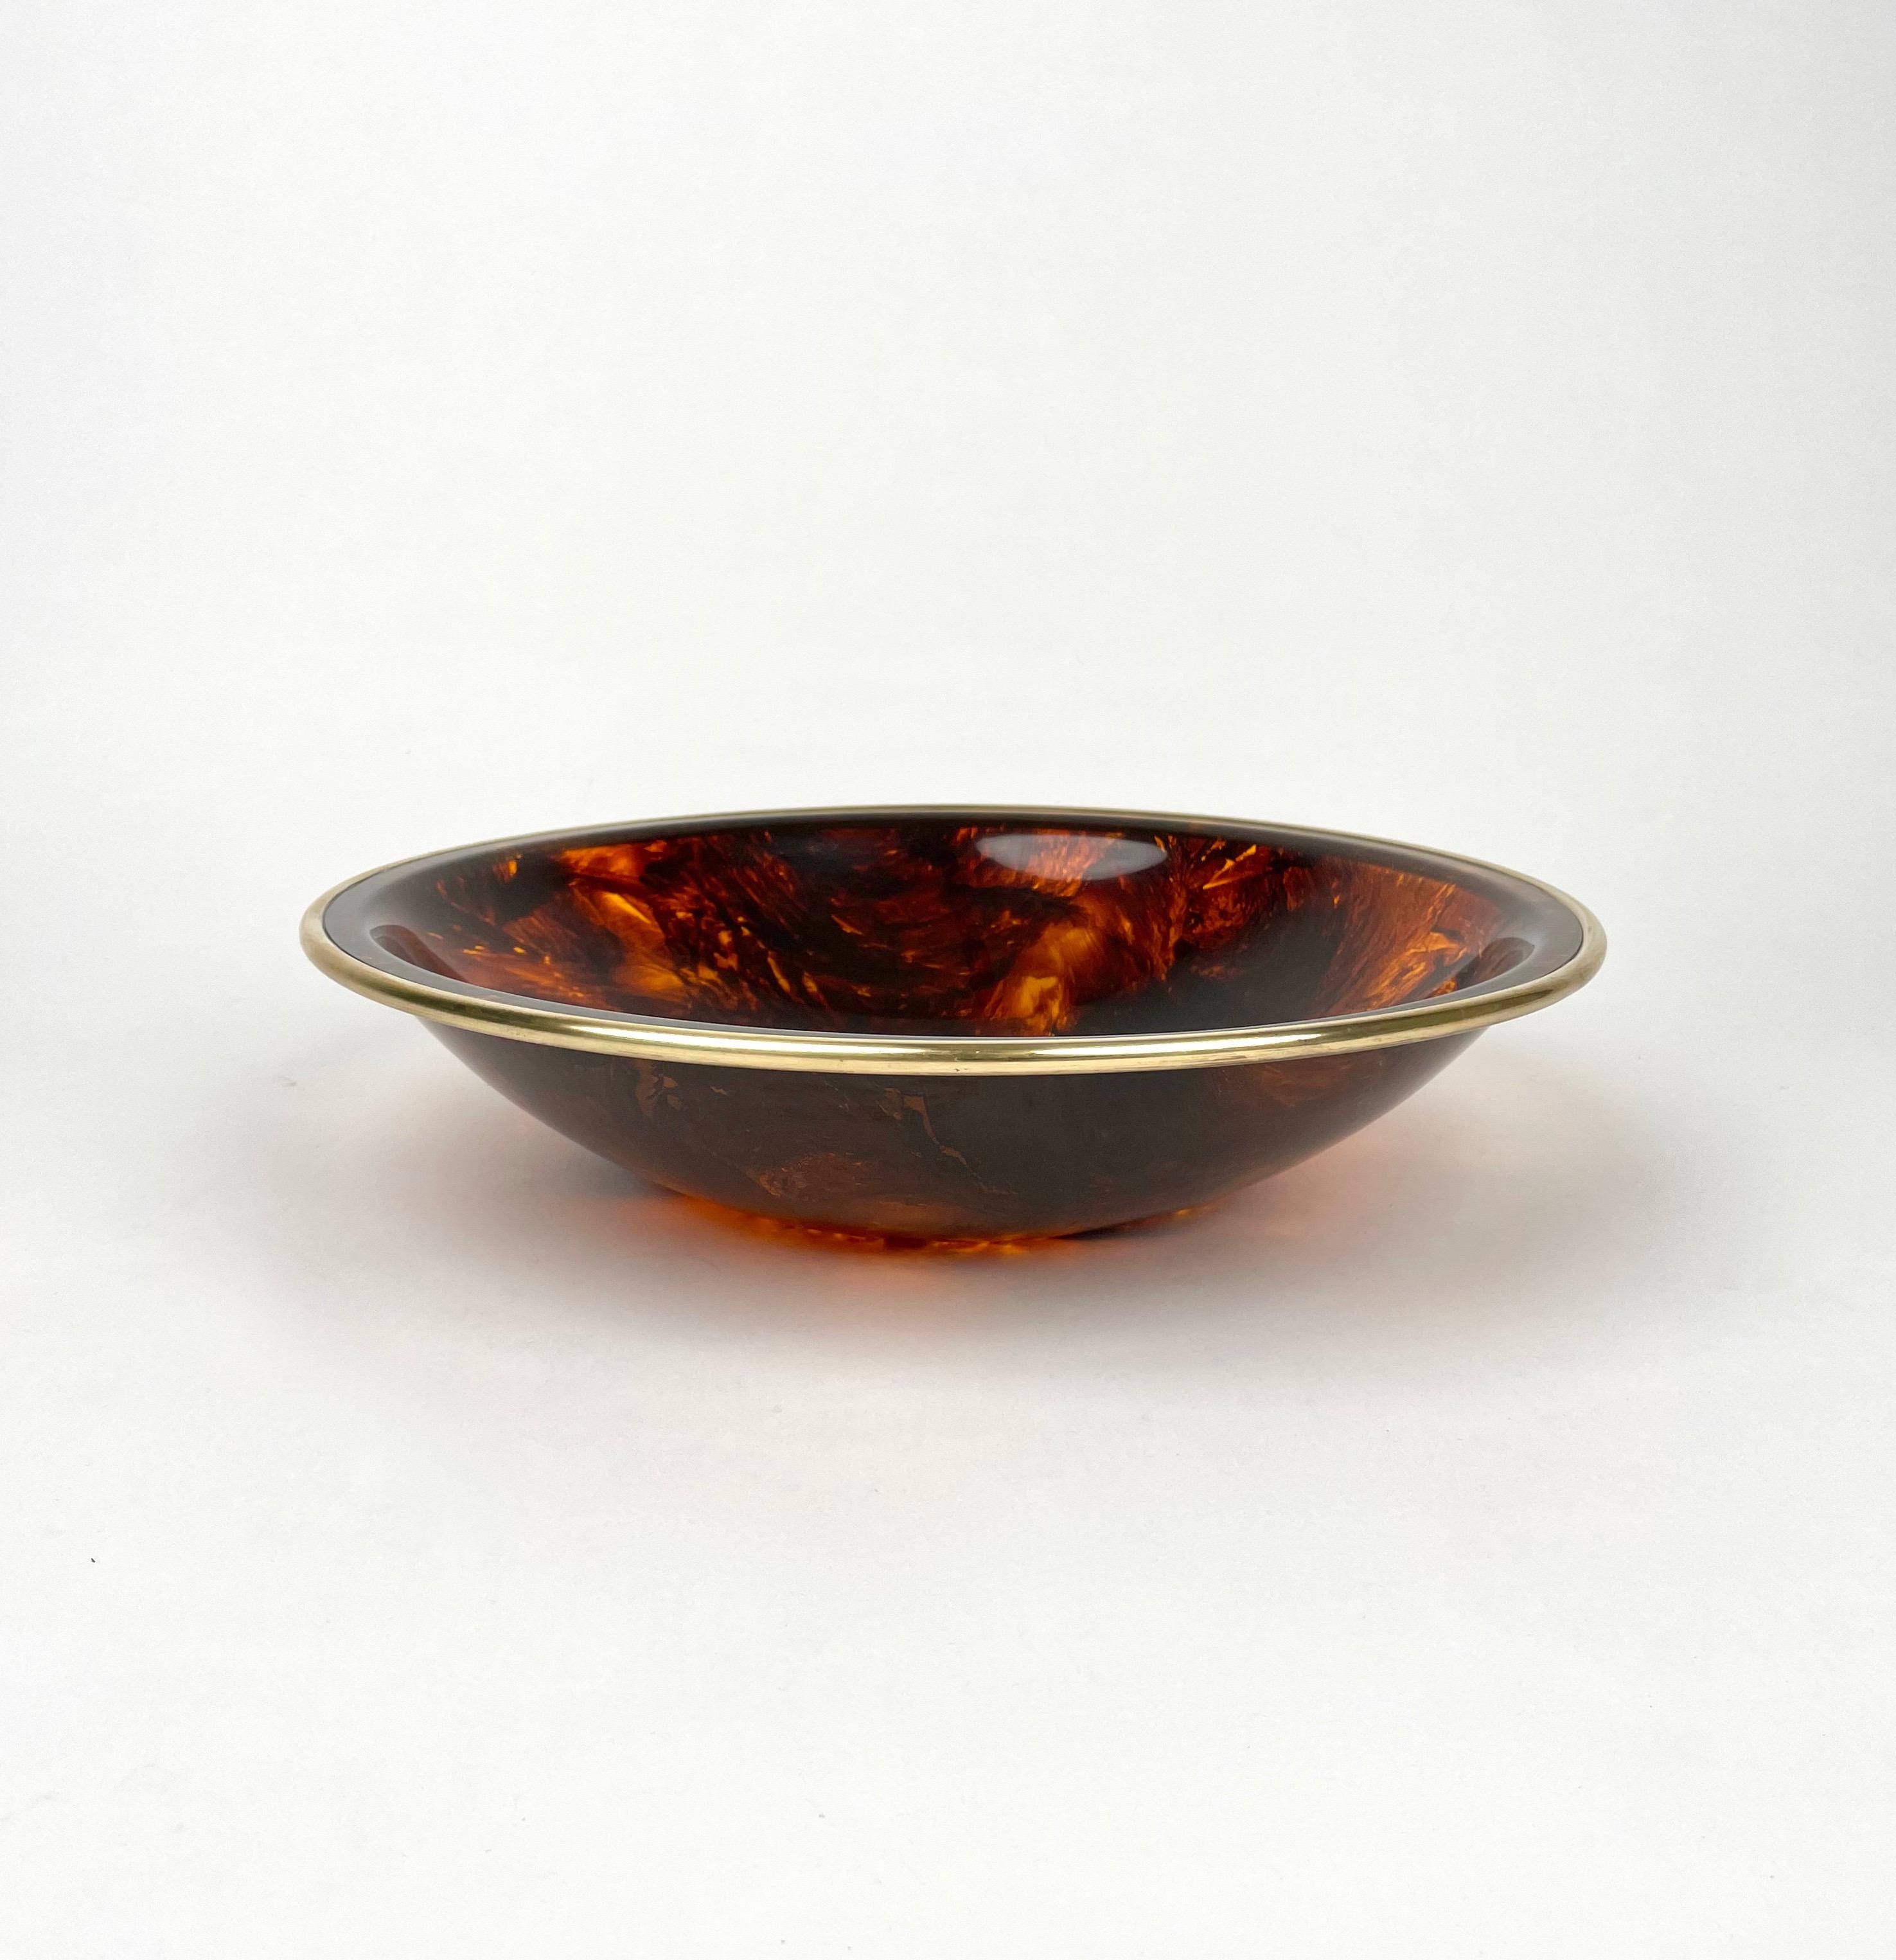 Bowl centerpiece in tortoiseshell-effect lucite with brass border in the style of Christian Dior. 

Made in Italy in the 1970s.